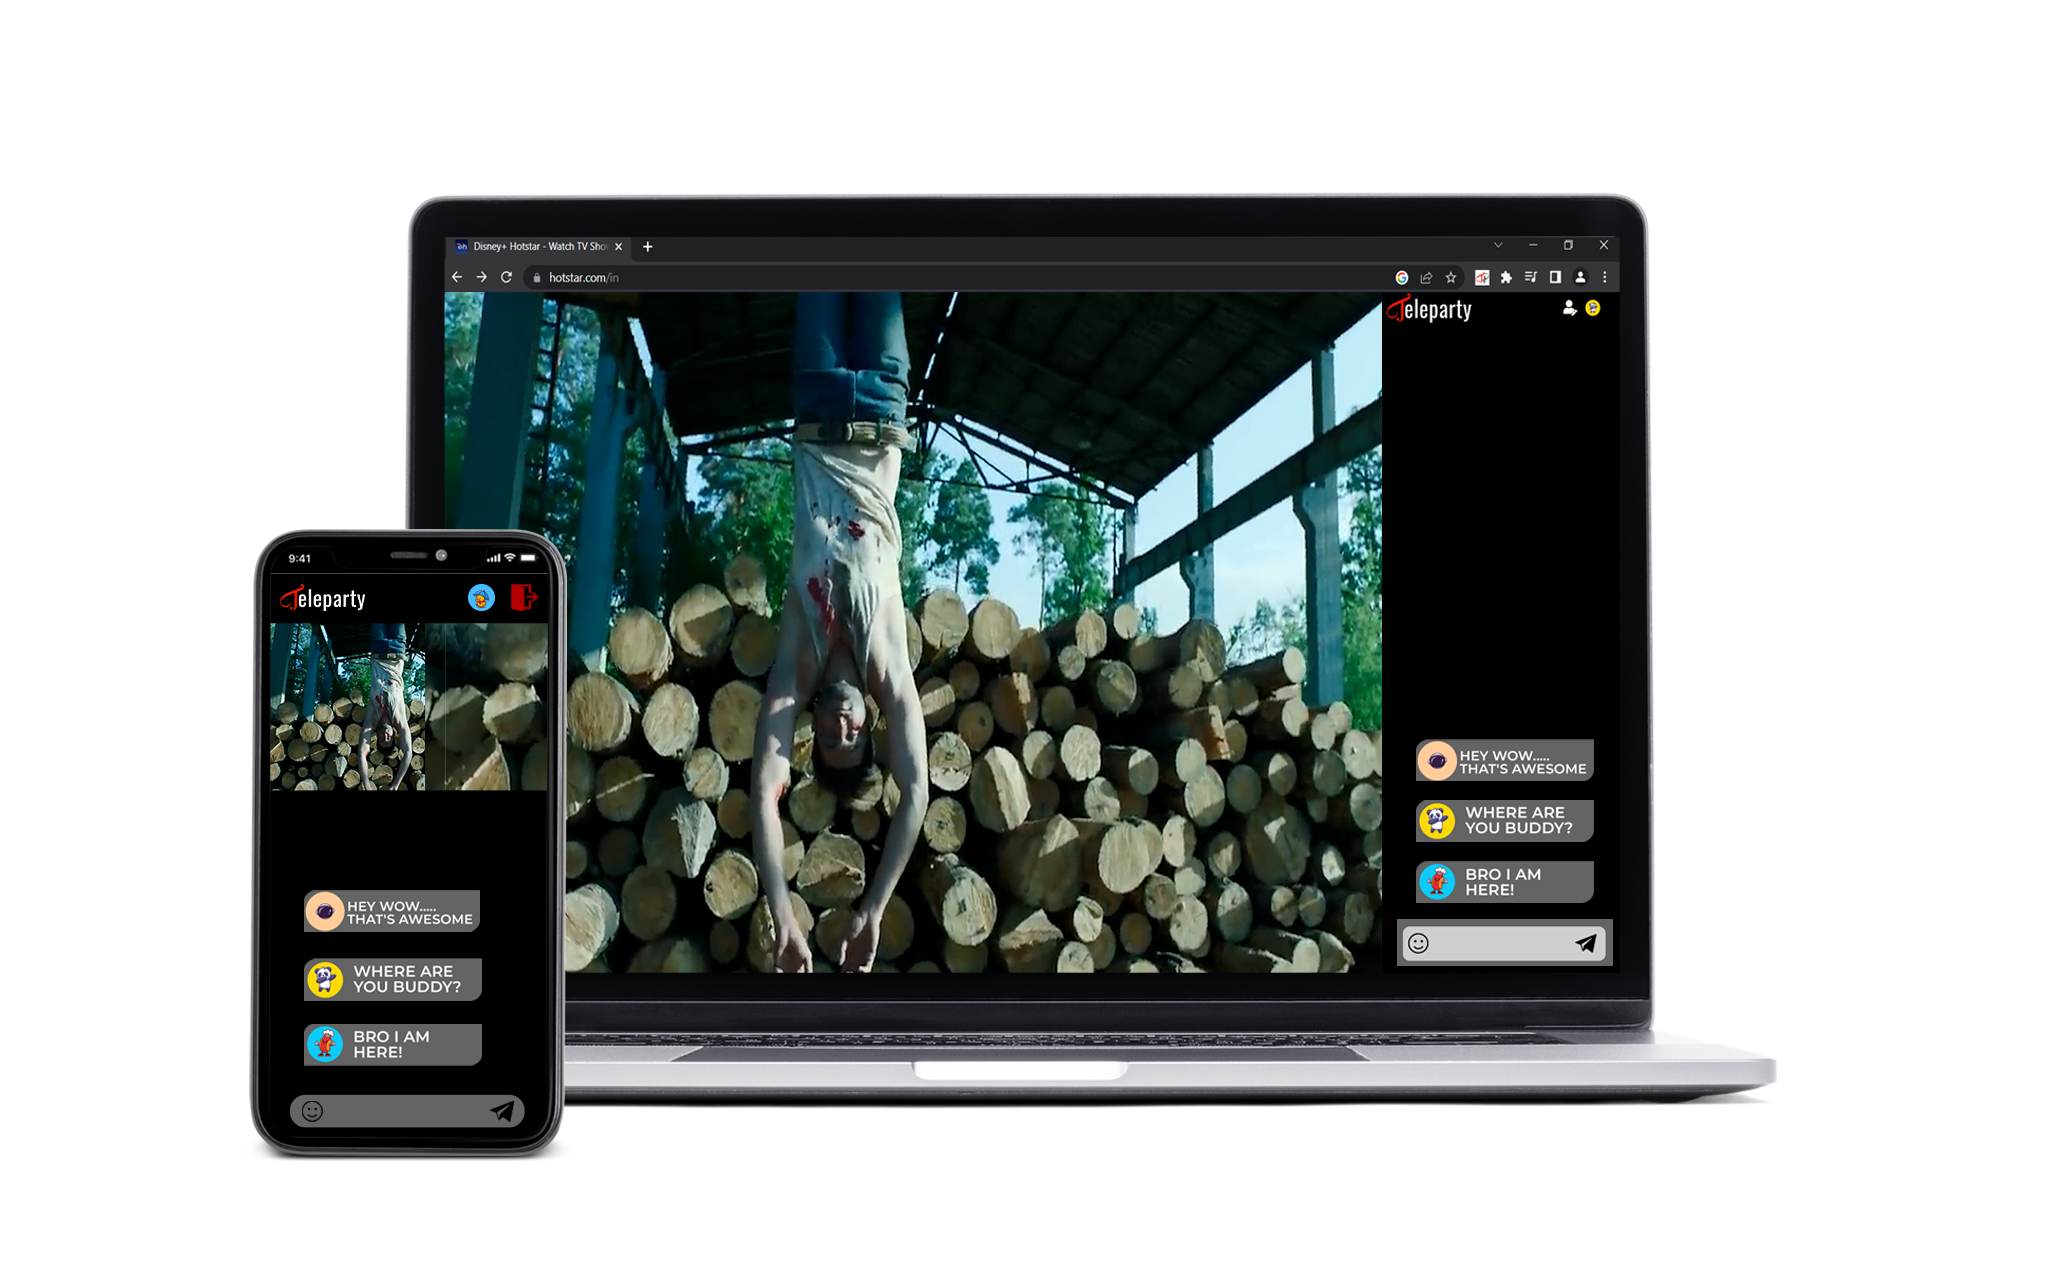 Introducing Sky Live, the New Interactive Camera From Sky